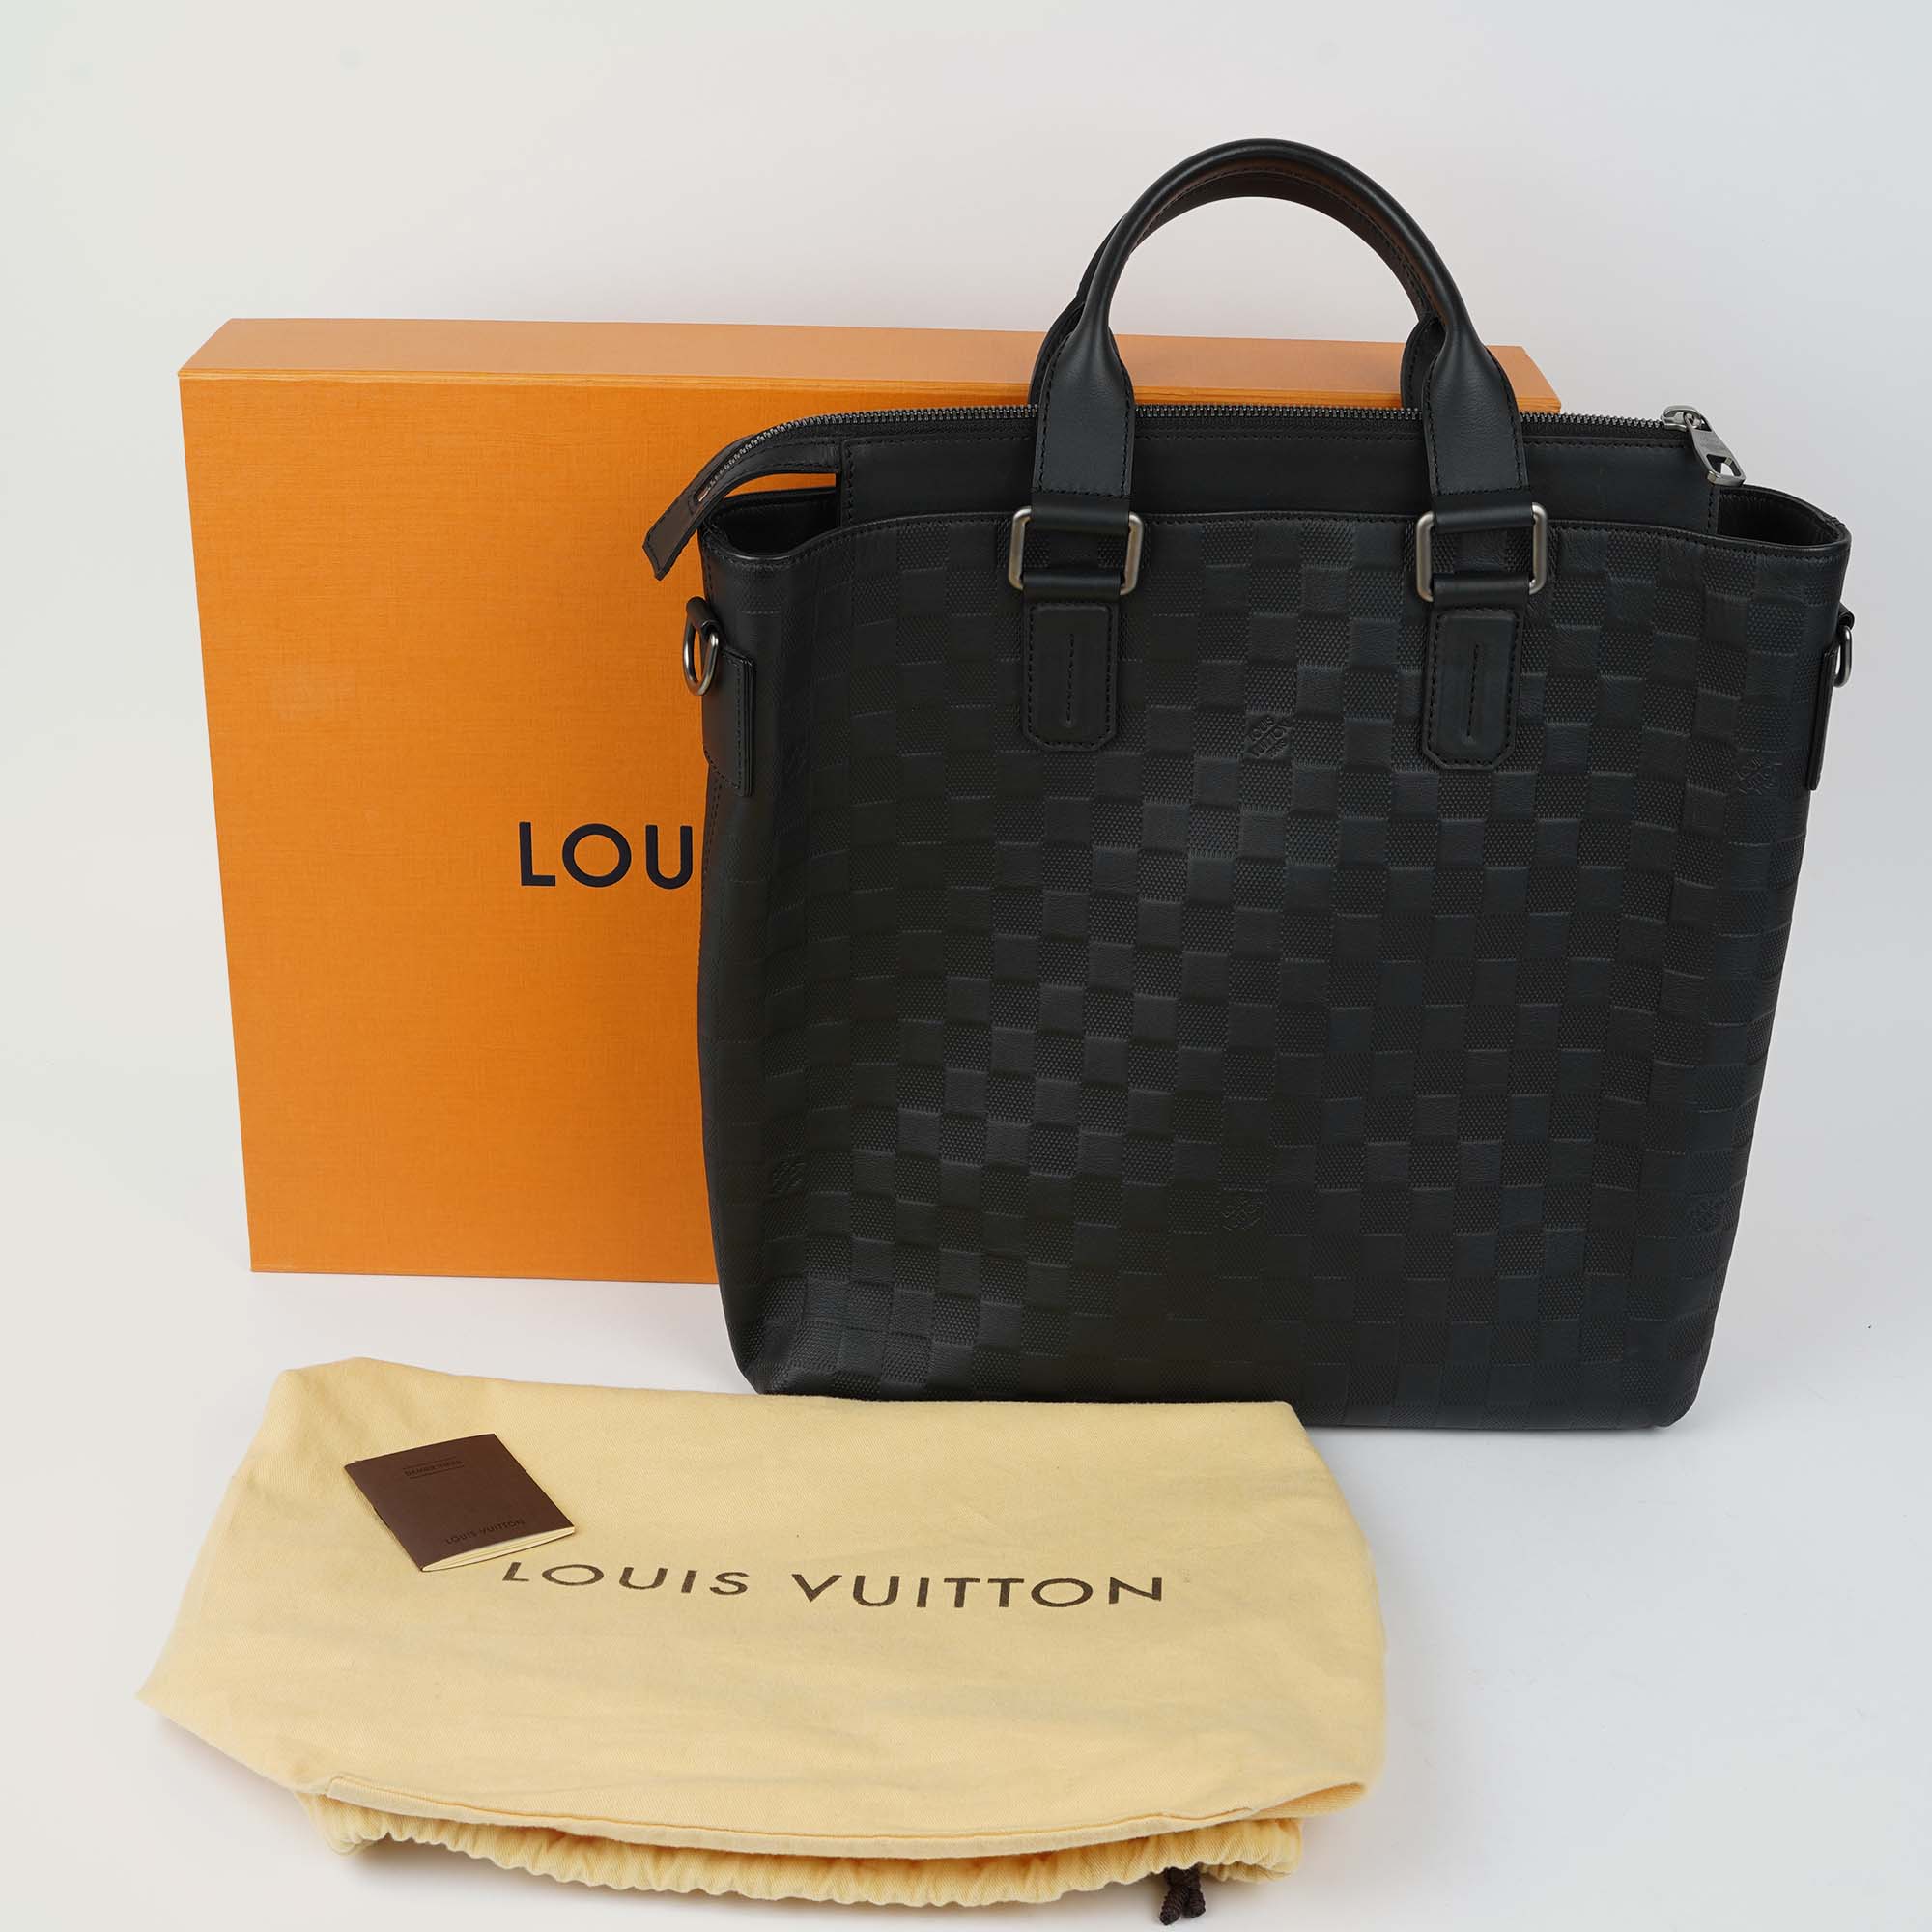 Daily Tote Bag - LOUIS VUITTON - Affordable Luxury image